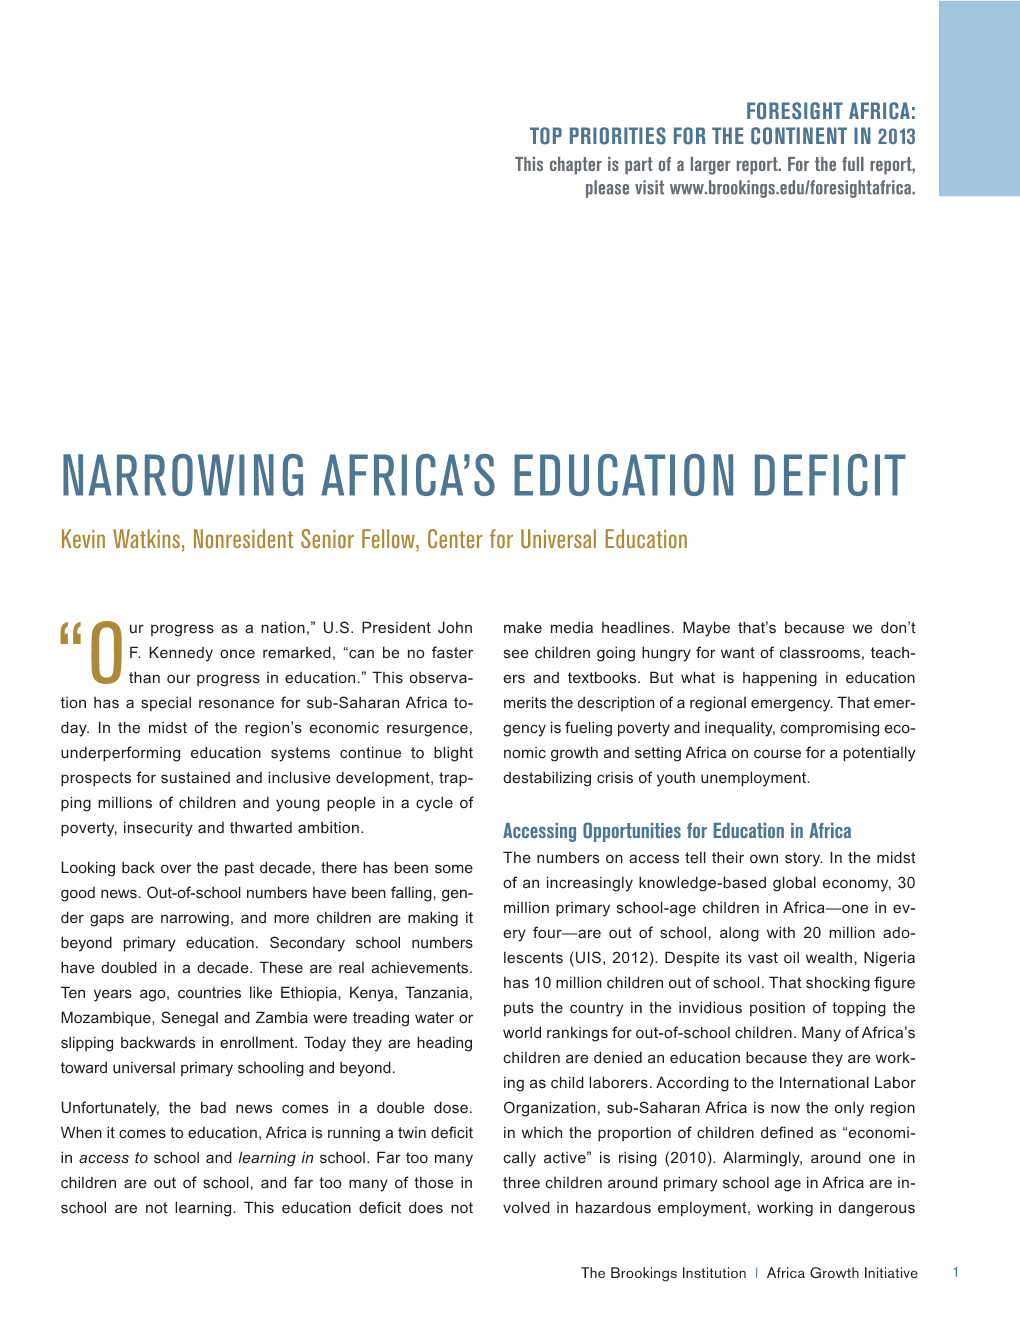 Narrowing Africa's Education Deficit